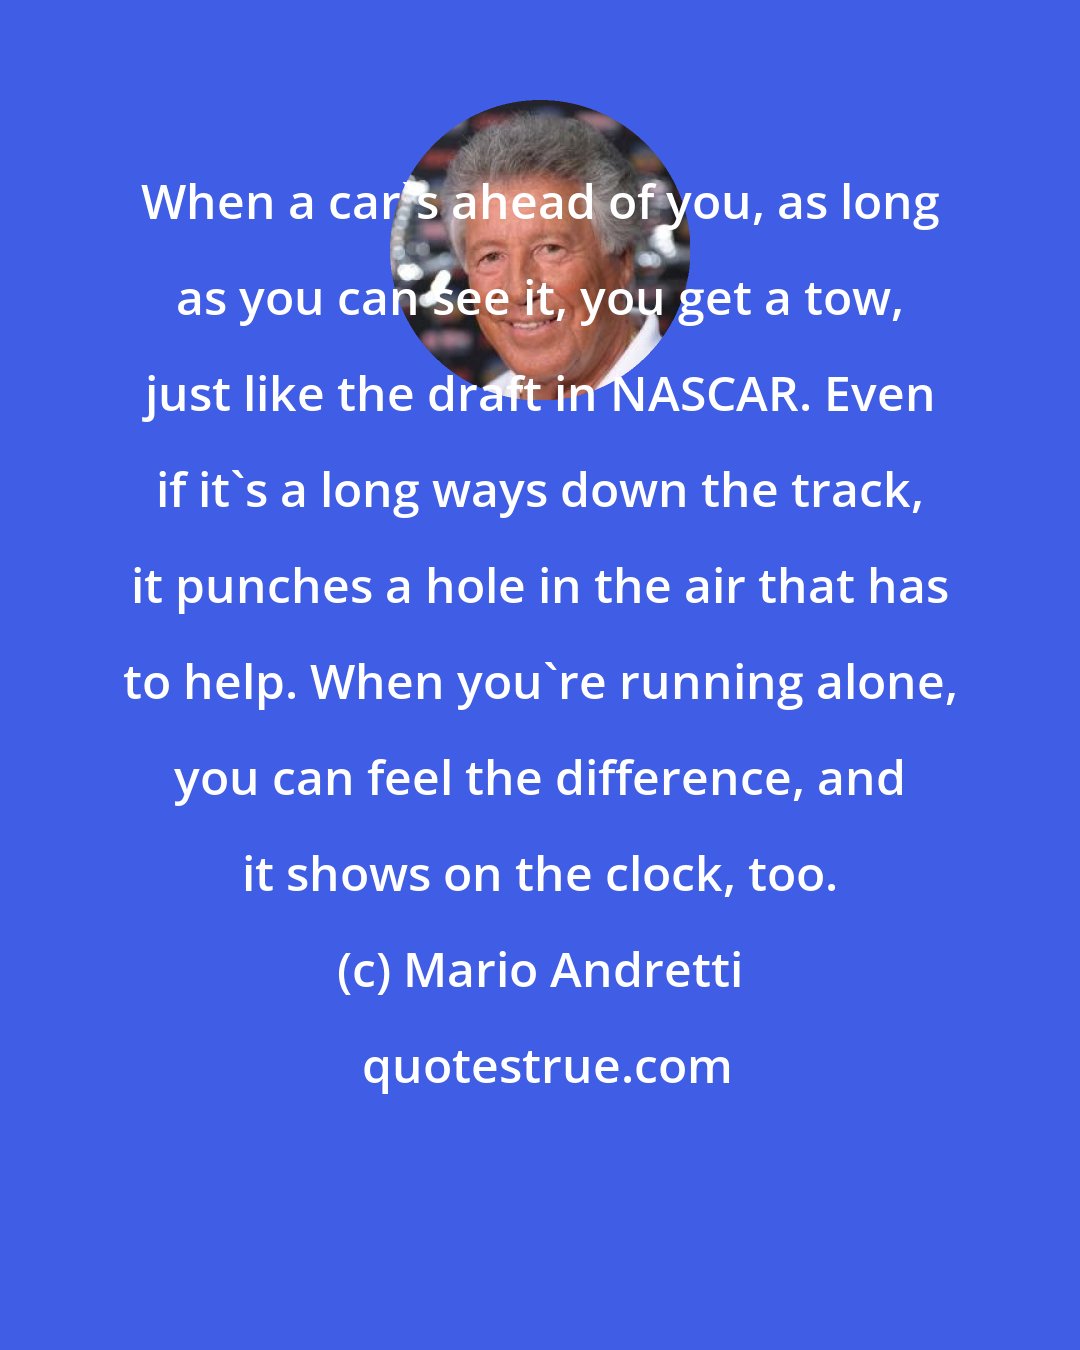 Mario Andretti: When a car's ahead of you, as long as you can see it, you get a tow, just like the draft in NASCAR. Even if it's a long ways down the track, it punches a hole in the air that has to help. When you're running alone, you can feel the difference, and it shows on the clock, too.